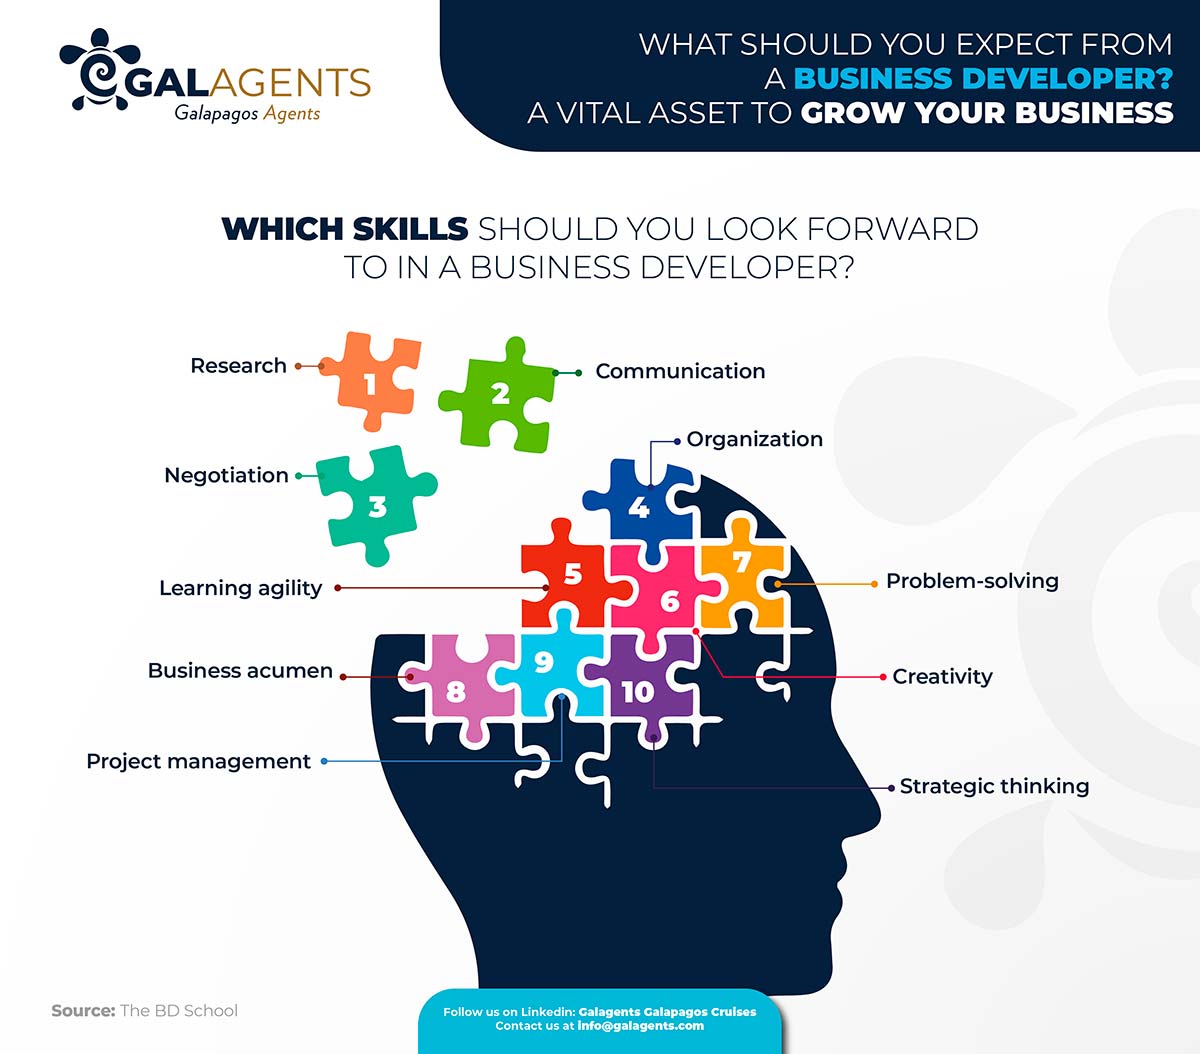 Which skills should you look forward to in a business developer by Galagents